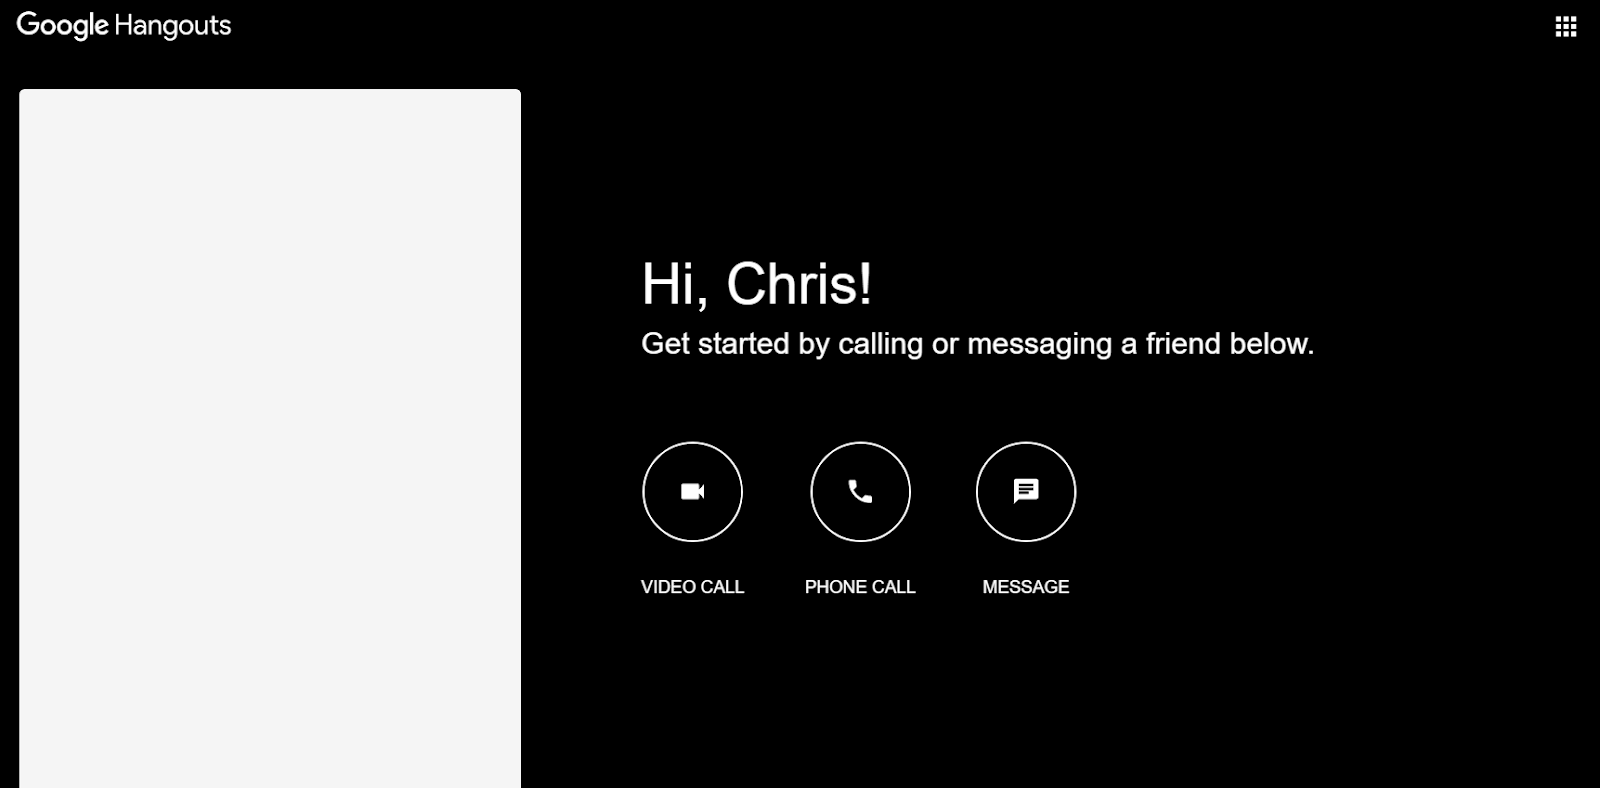 How to use Google Hangouts: Starting conversation